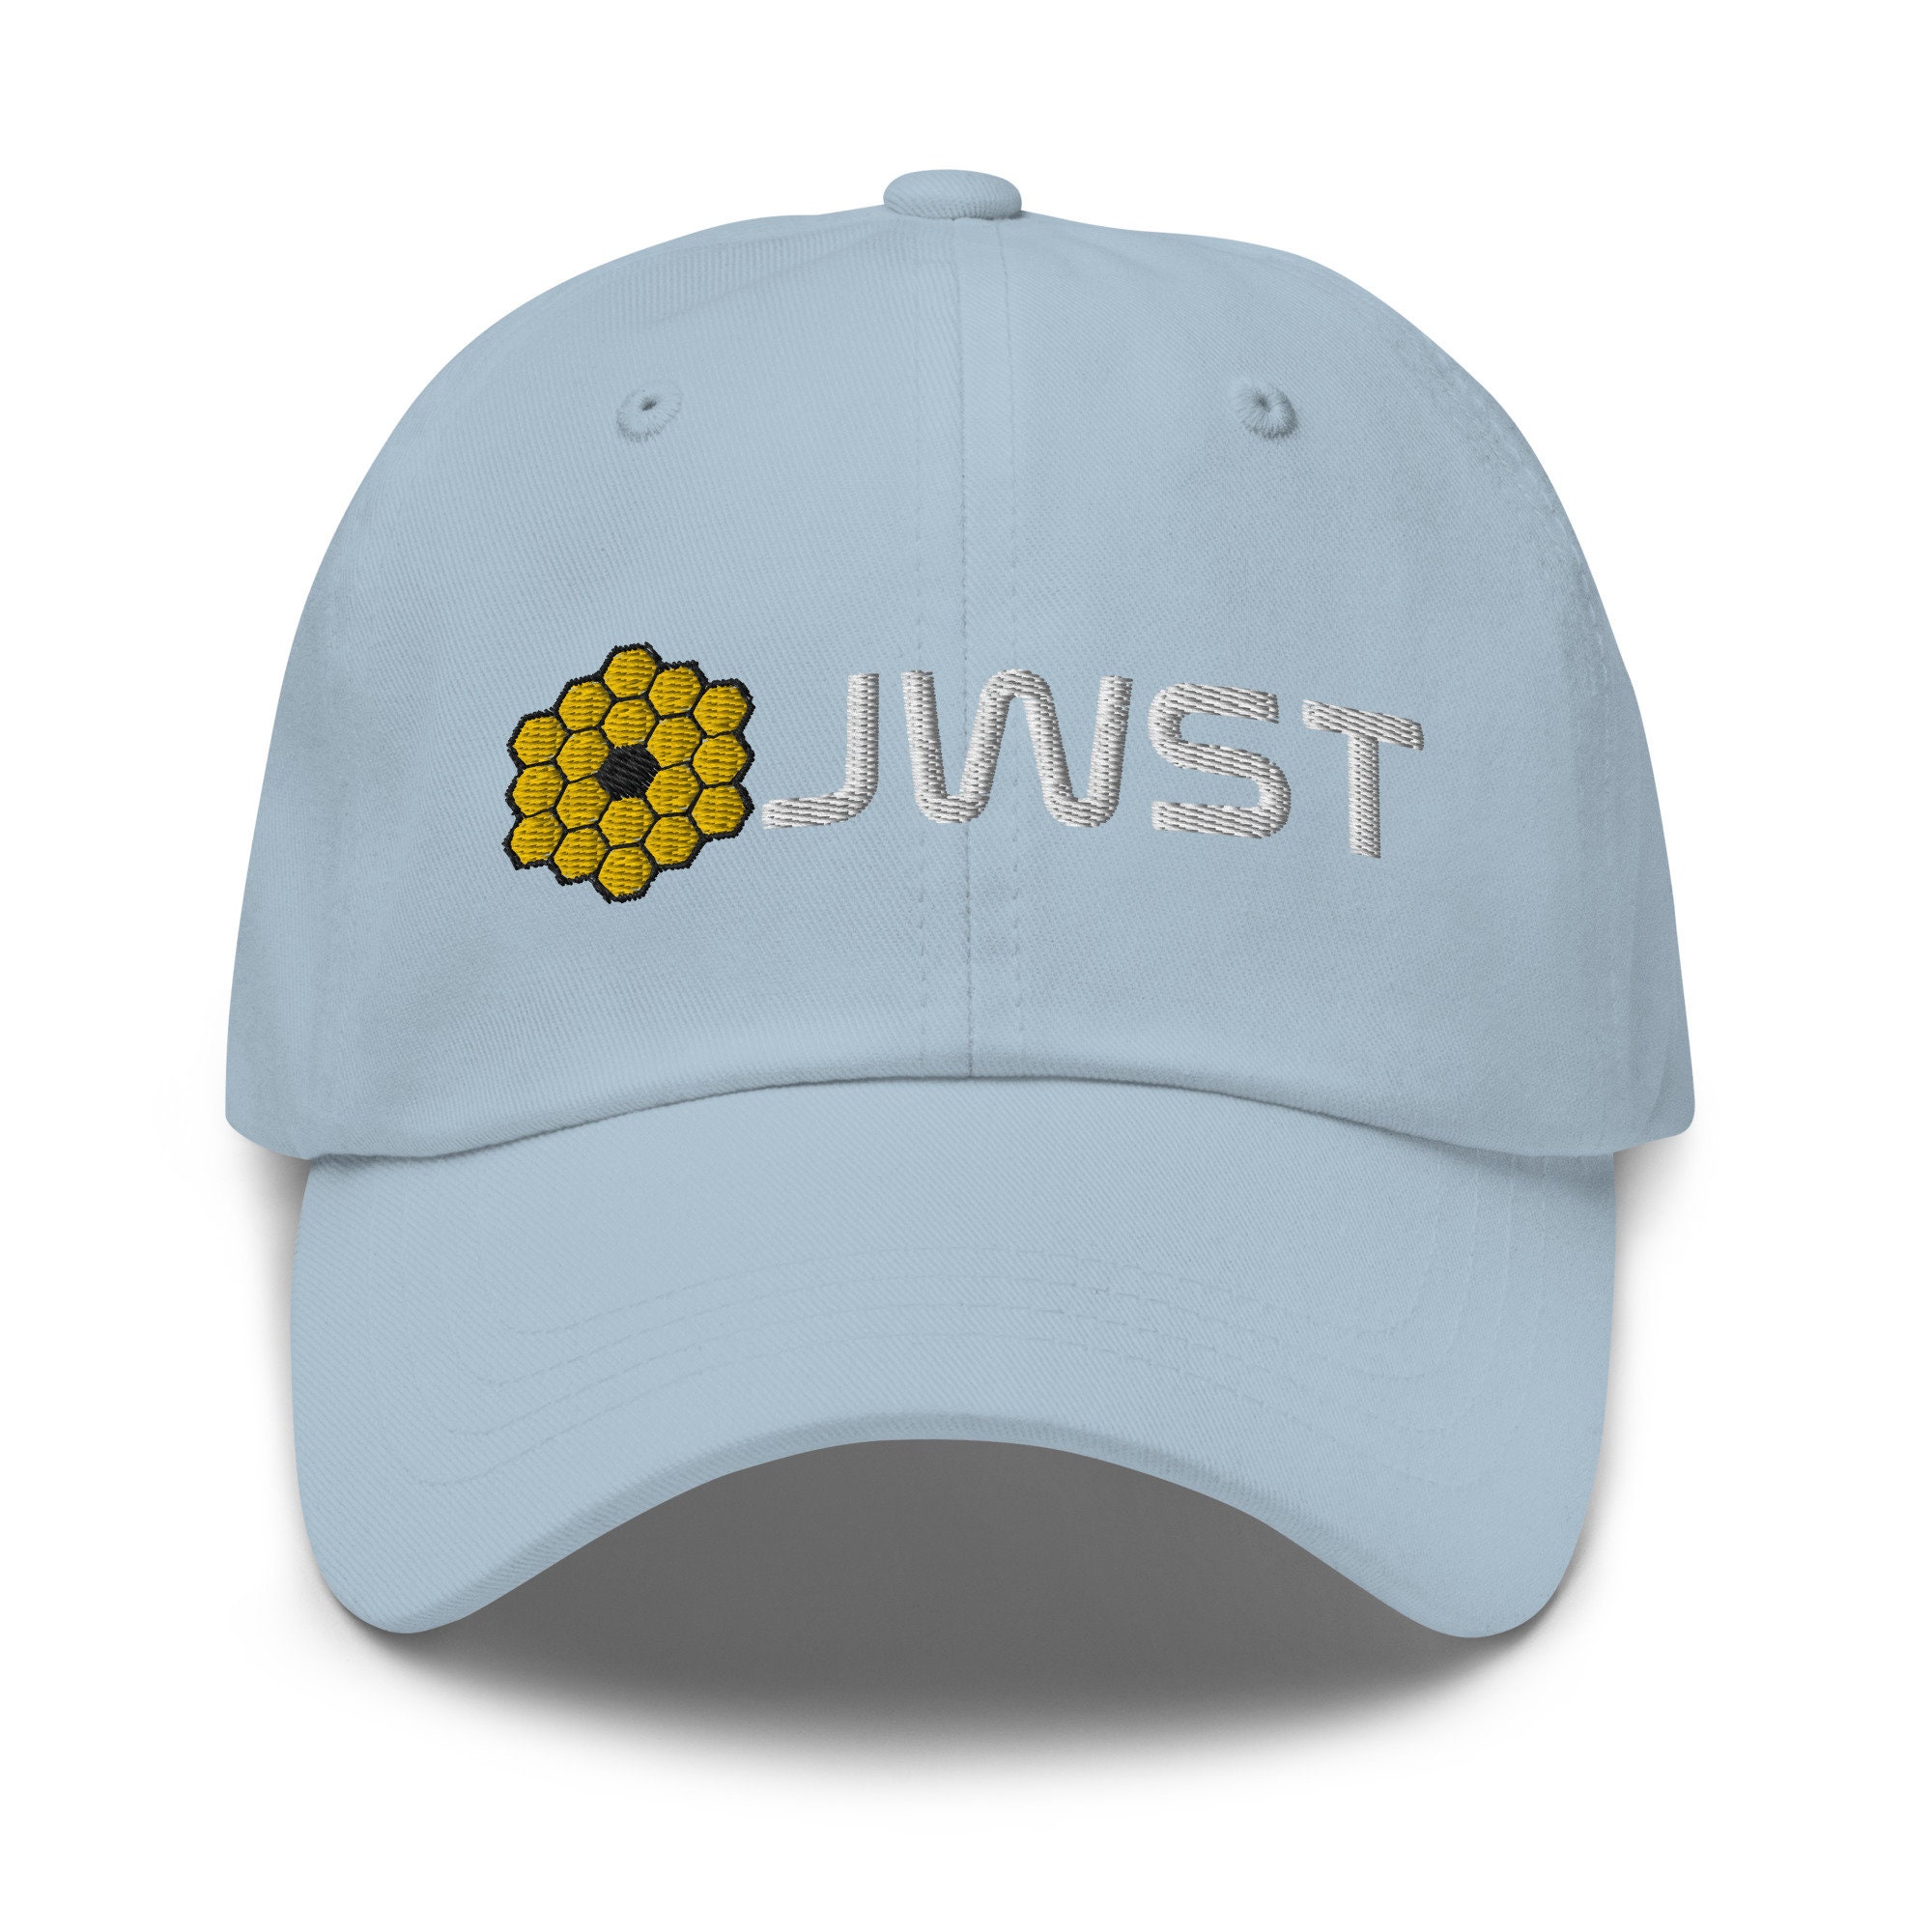 James Webb Space Telescope JWST Baseball Cap Father's Day Embroidered Hat